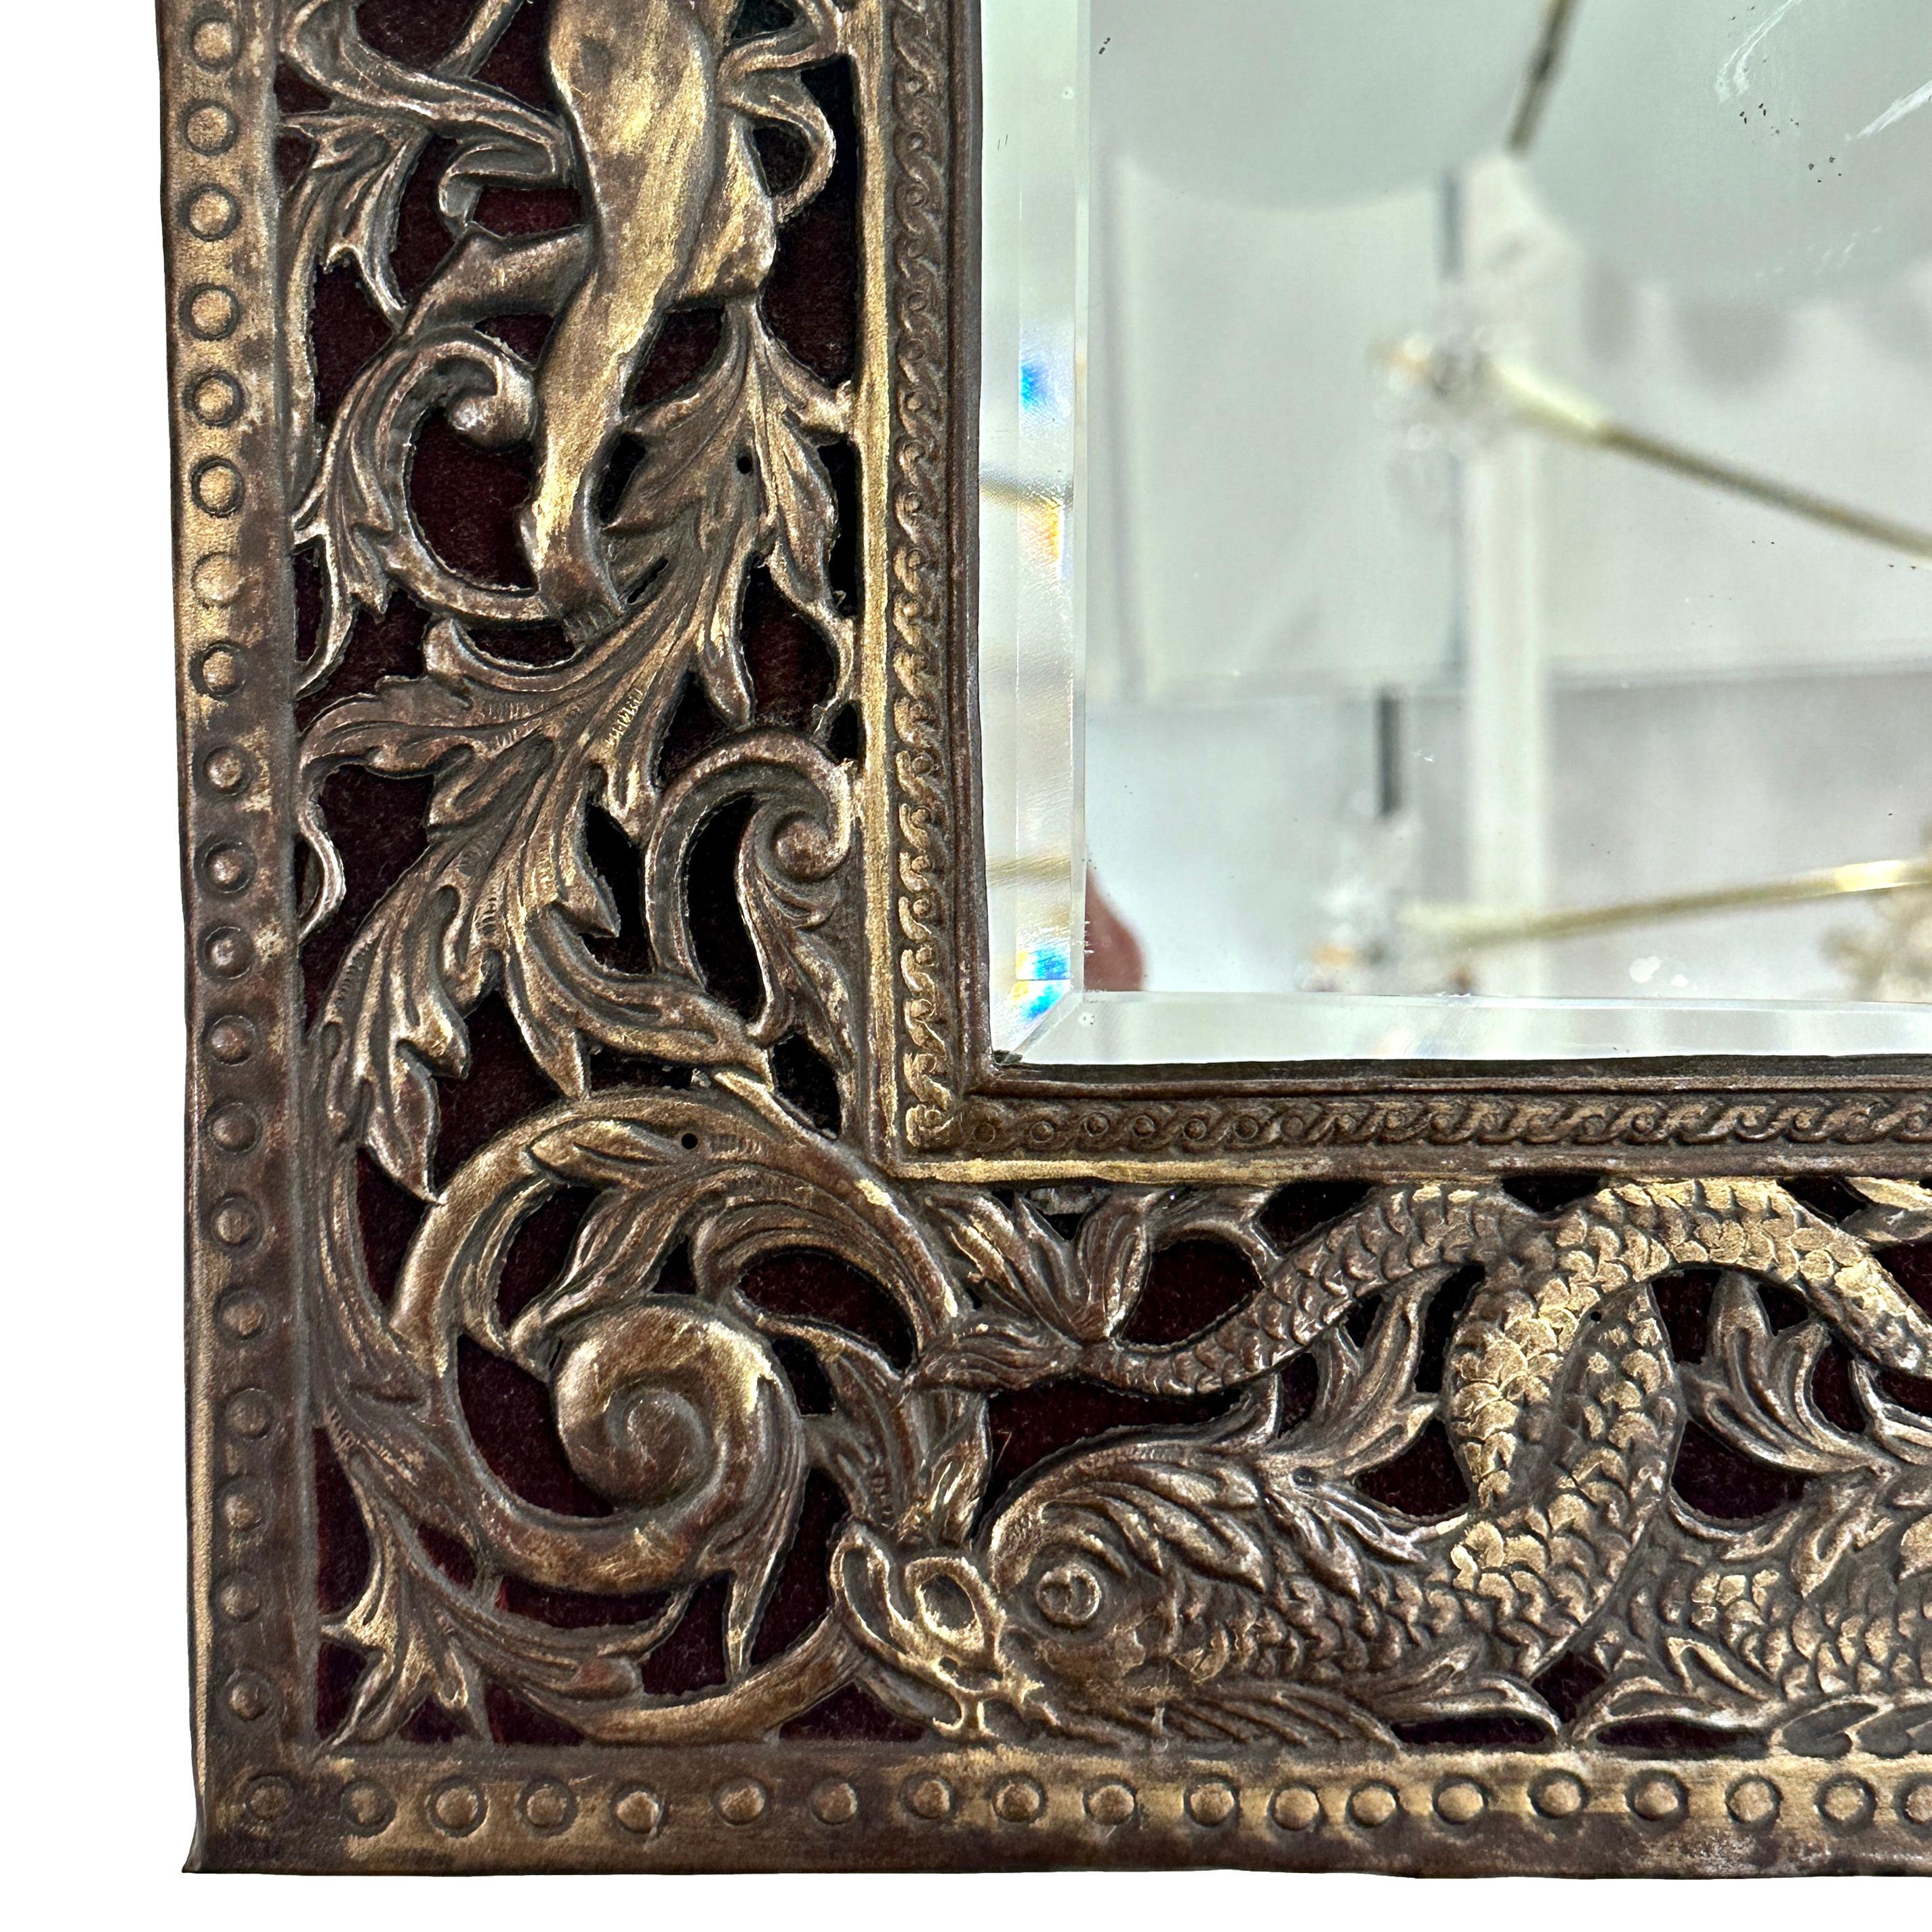 A circa 1900 French mirror with bronze applications, it can stand or hang.

Measurements:
Height: 17